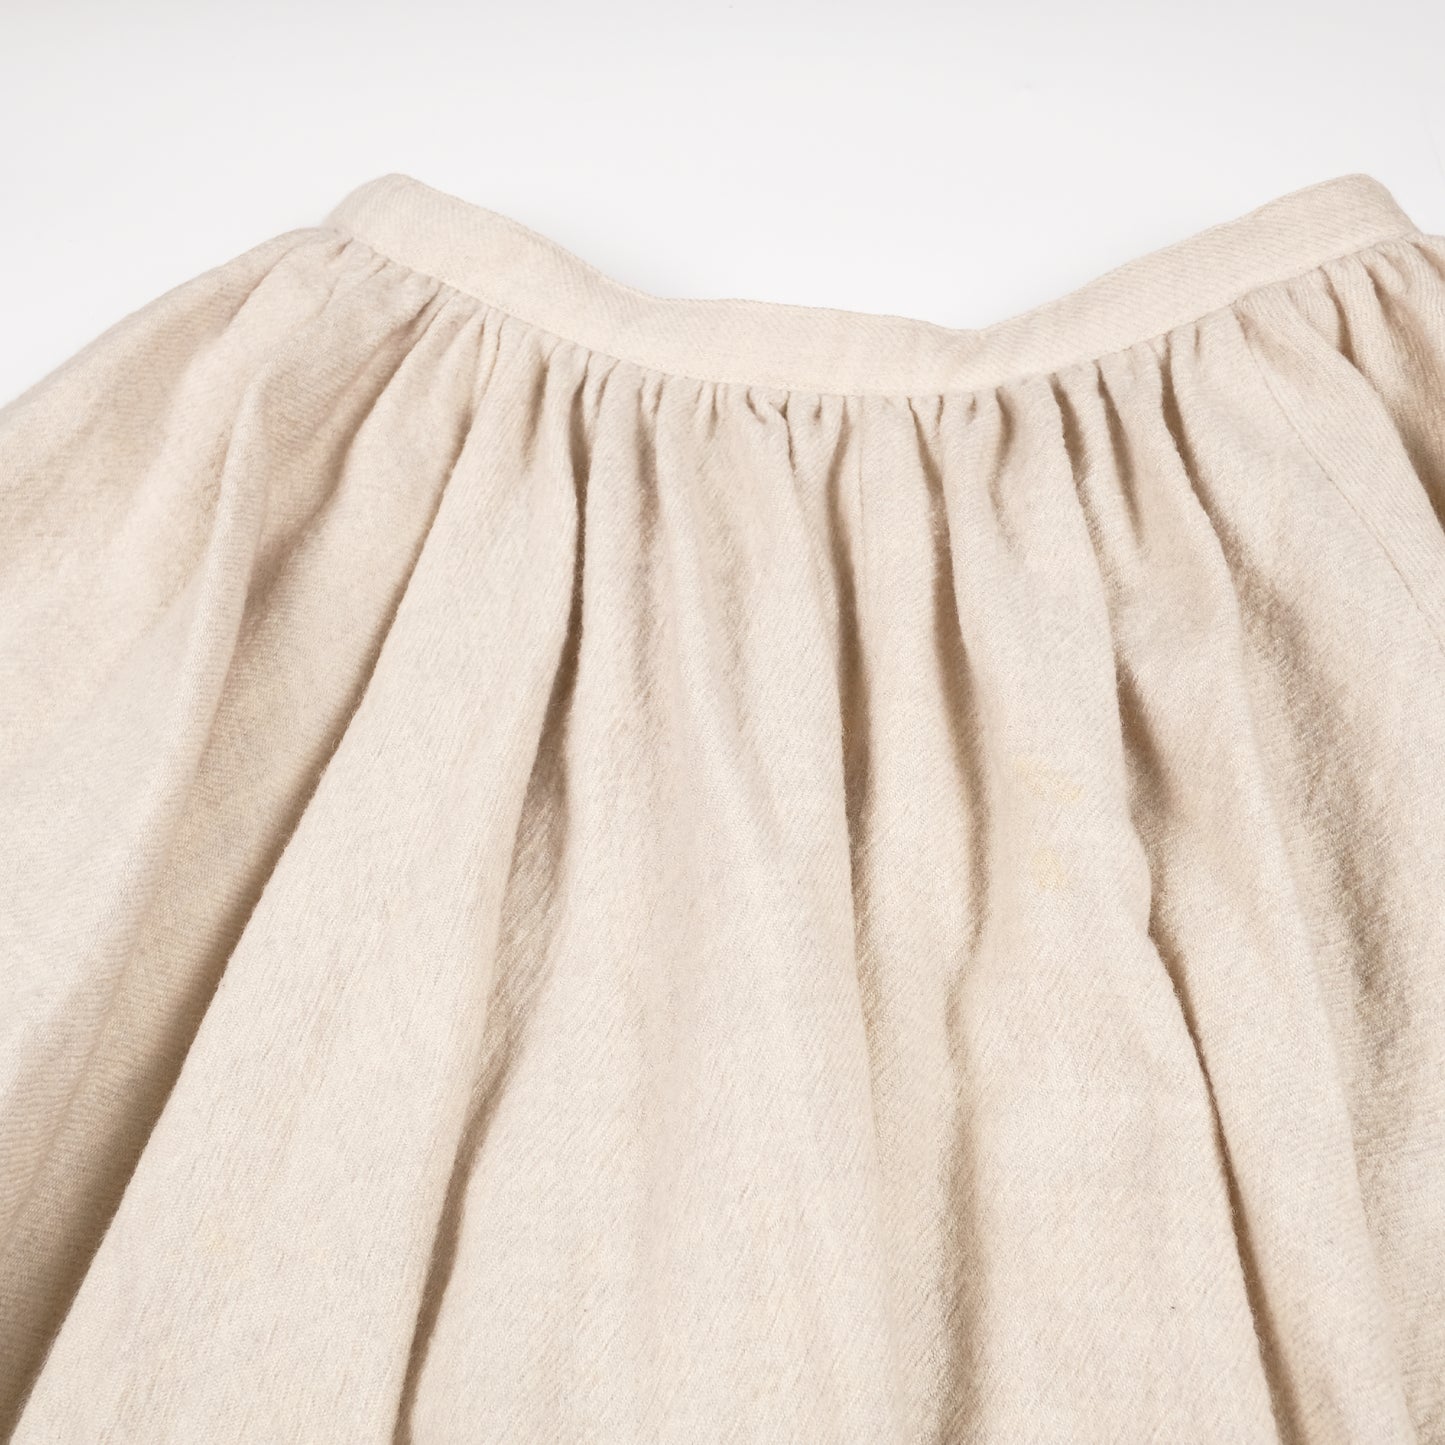 CDG Tricot Off White Bunched Skirt